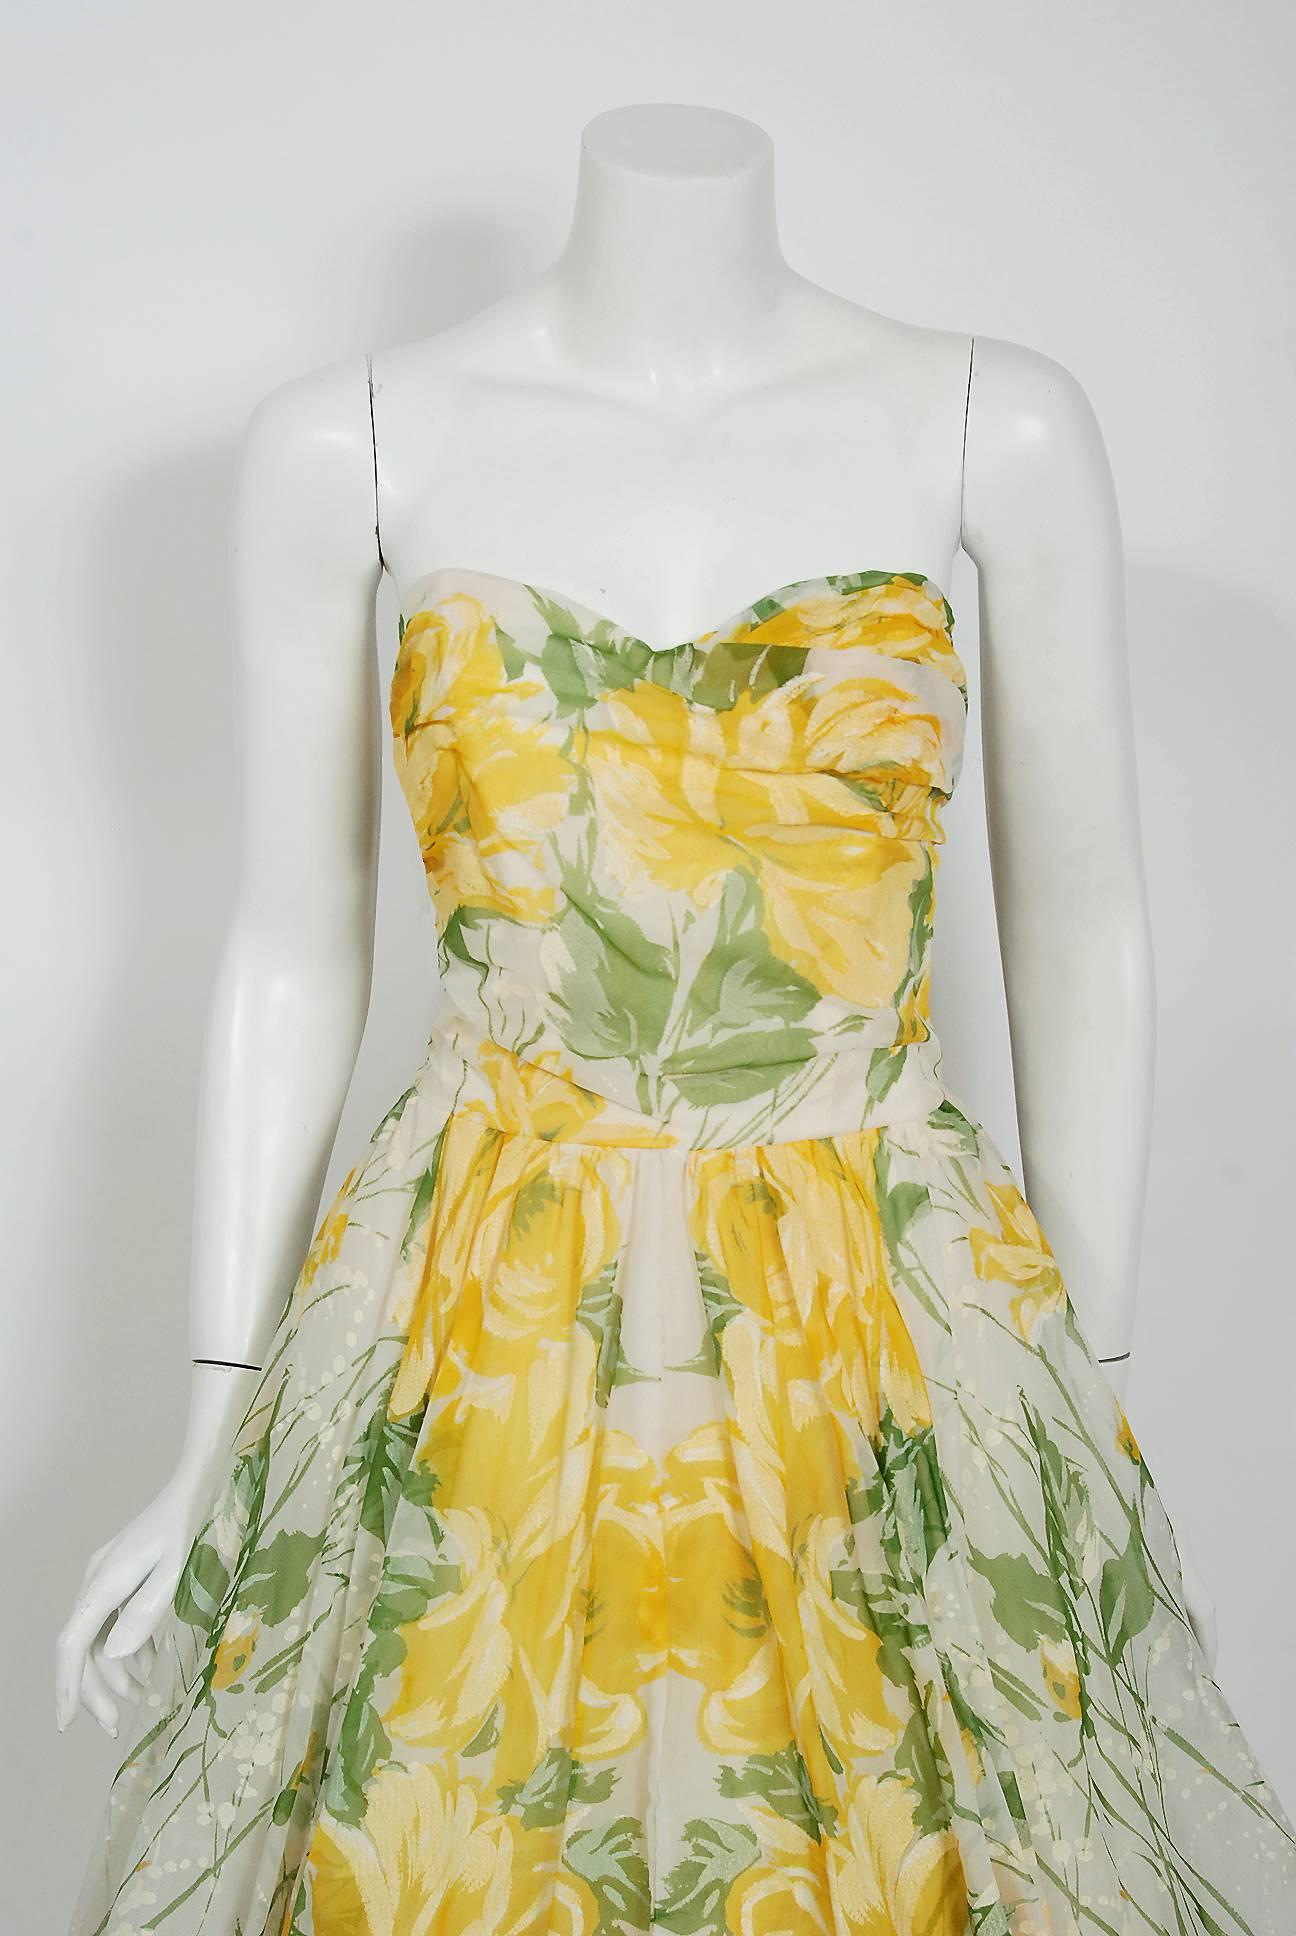 With its vivid yellow-roses watercolor floral print and flawless 